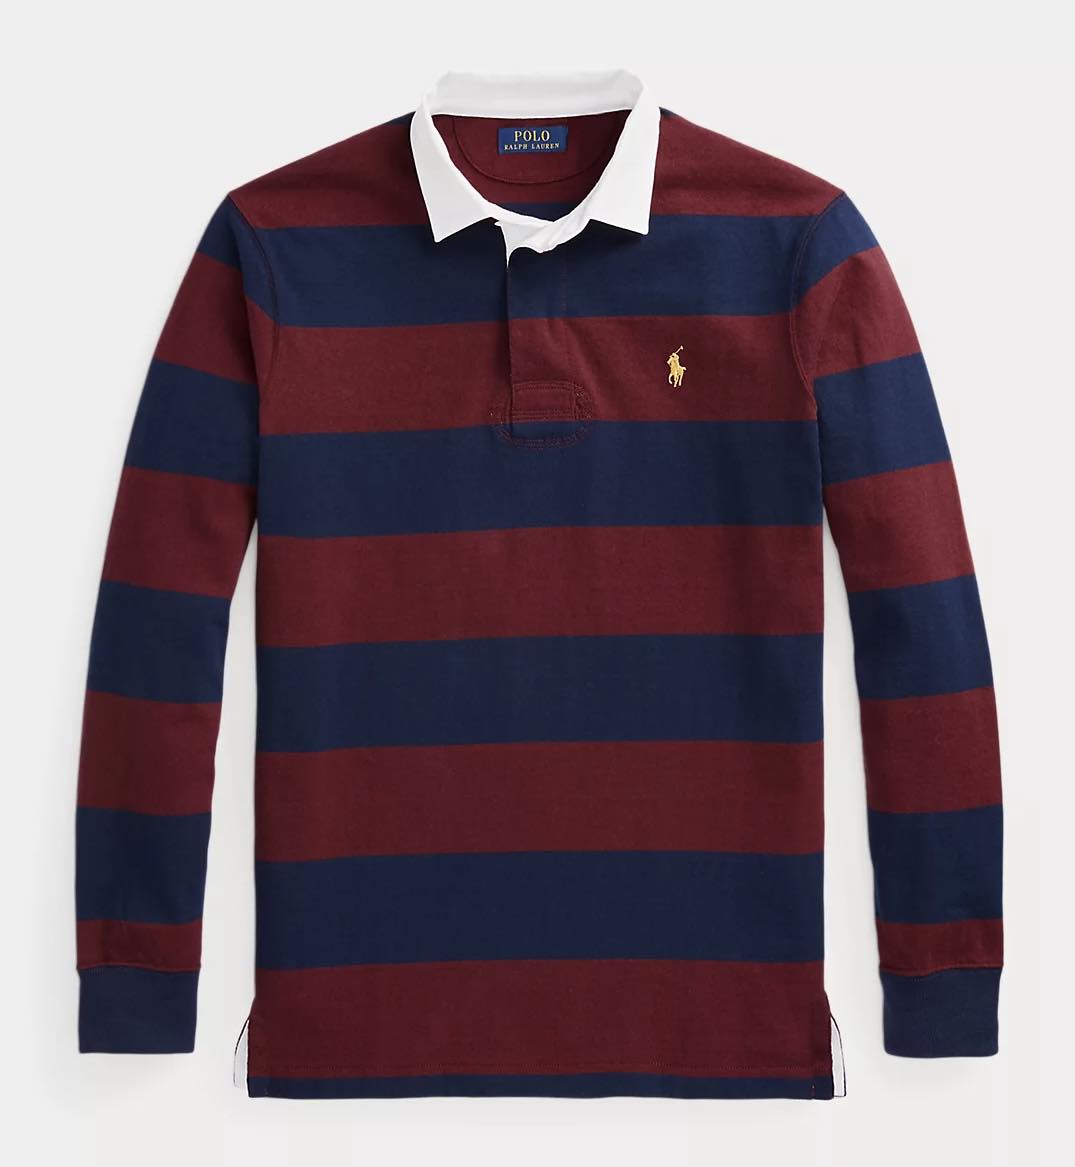 Polo Ralph Lauren Longsleeve Rugby - Cruise Navy/Classic Wine